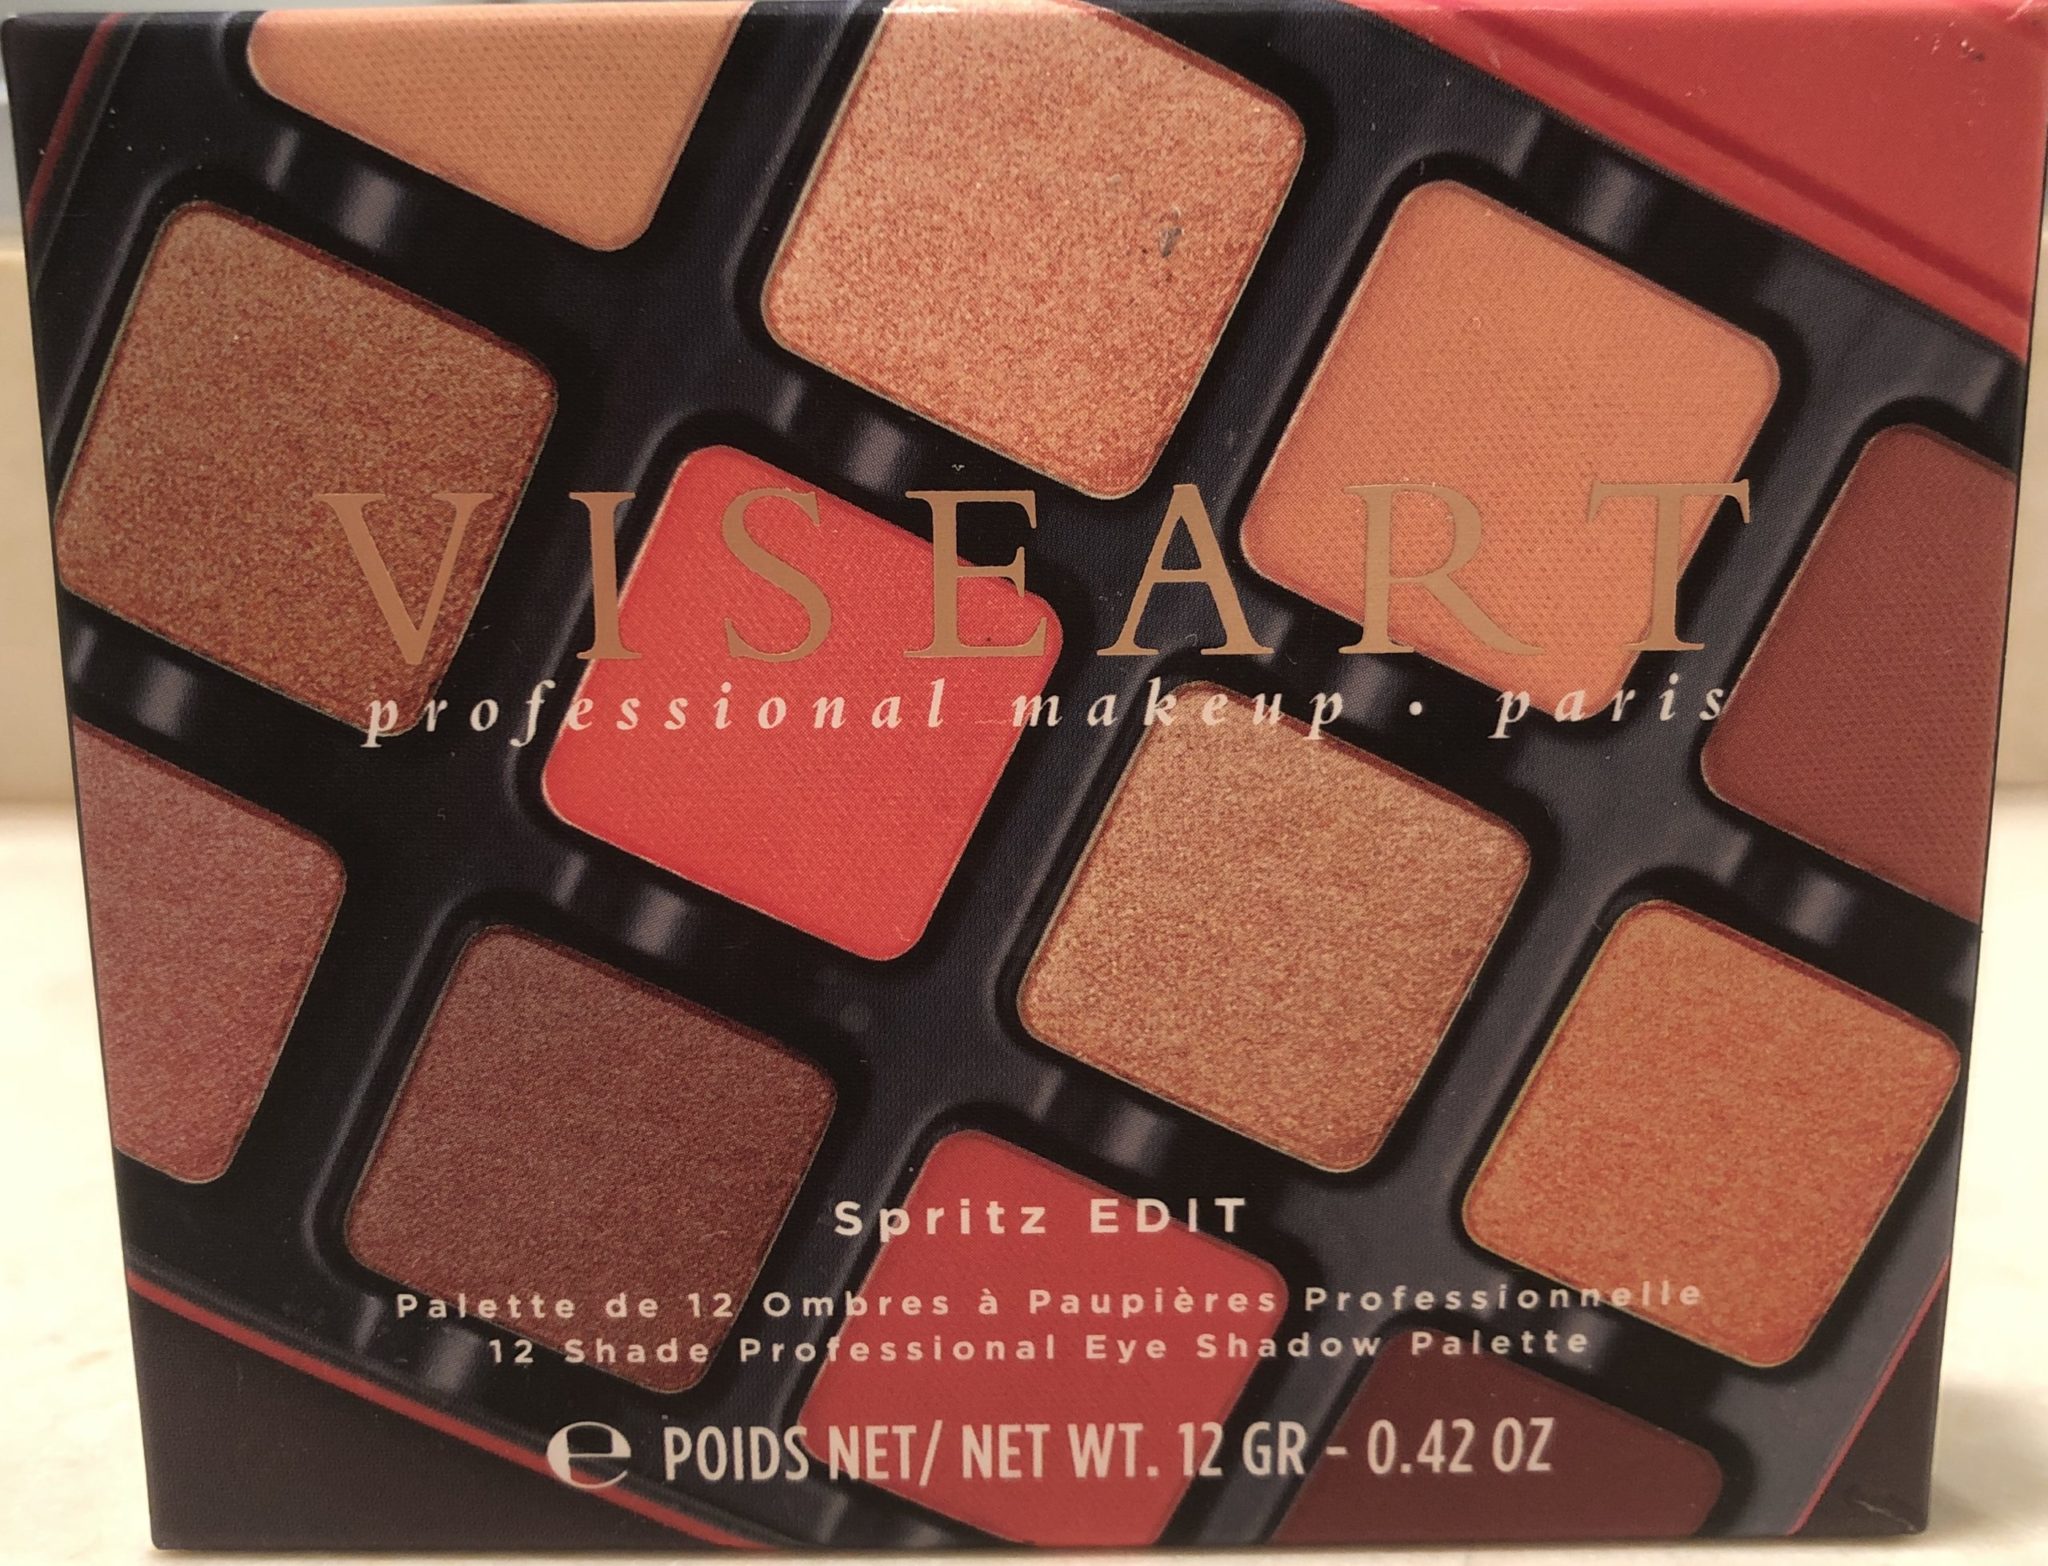 FRONT OF THE VISEART SPRITZ EDIT EYESHADOW PALETTE OUTER BOX